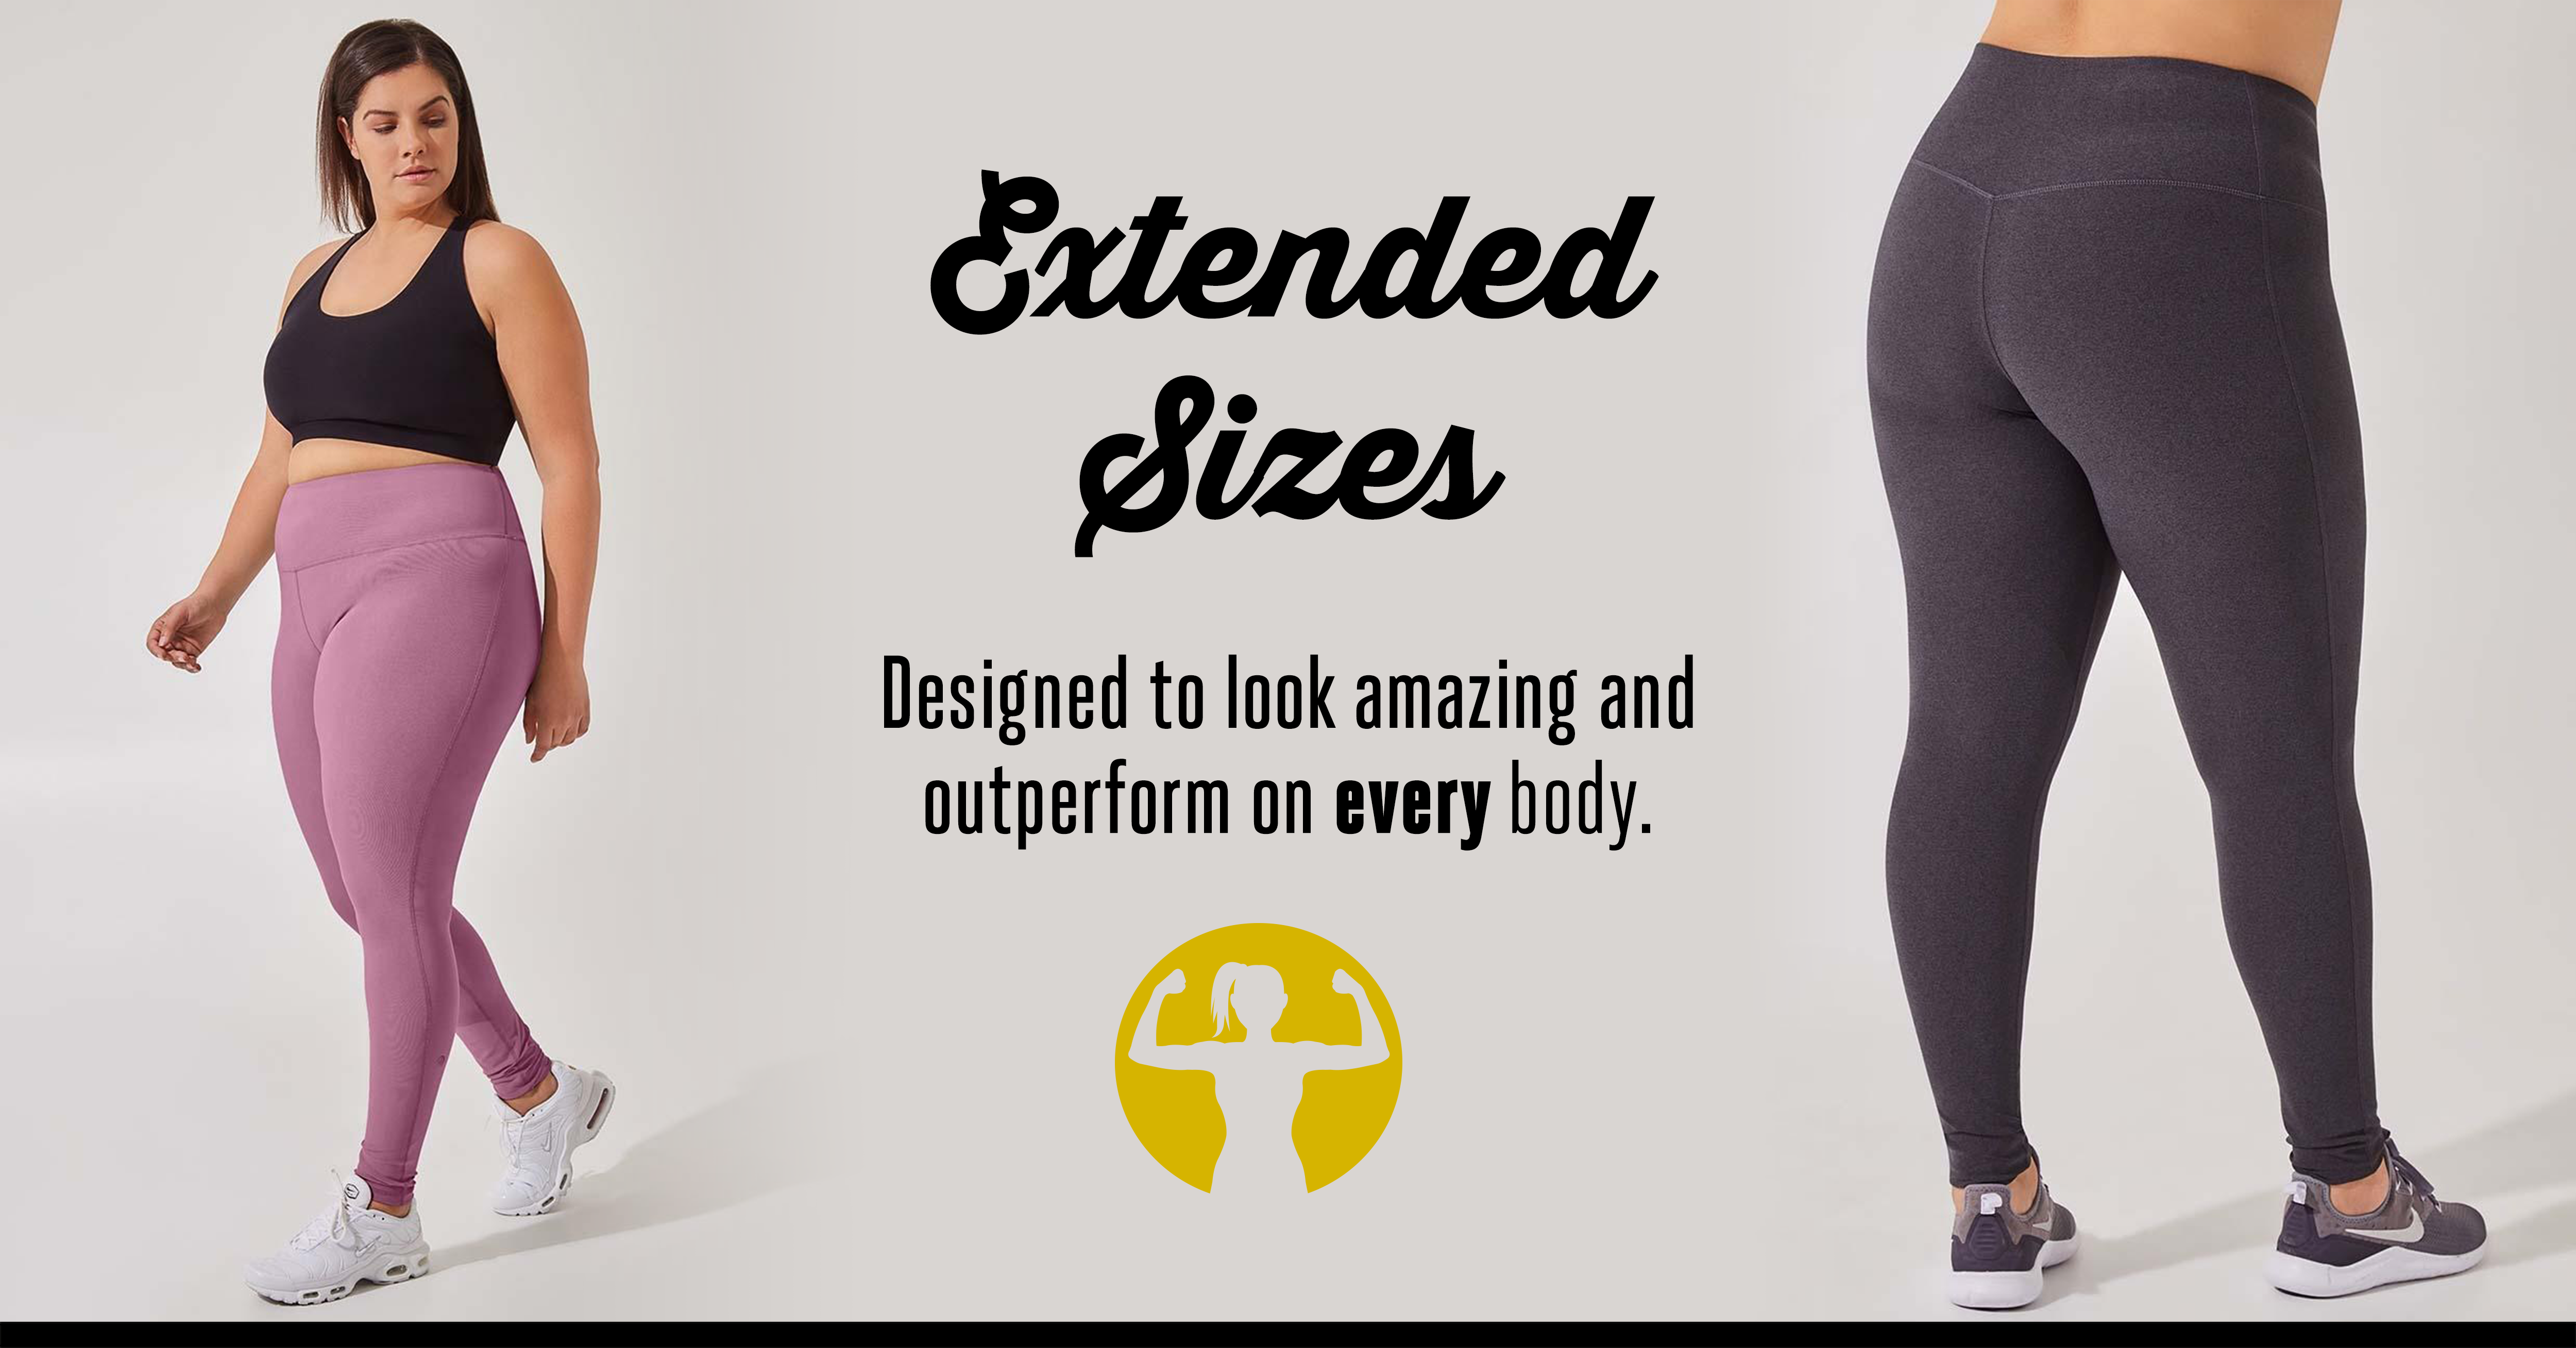 Extended or Plus Sized Clothing for Women